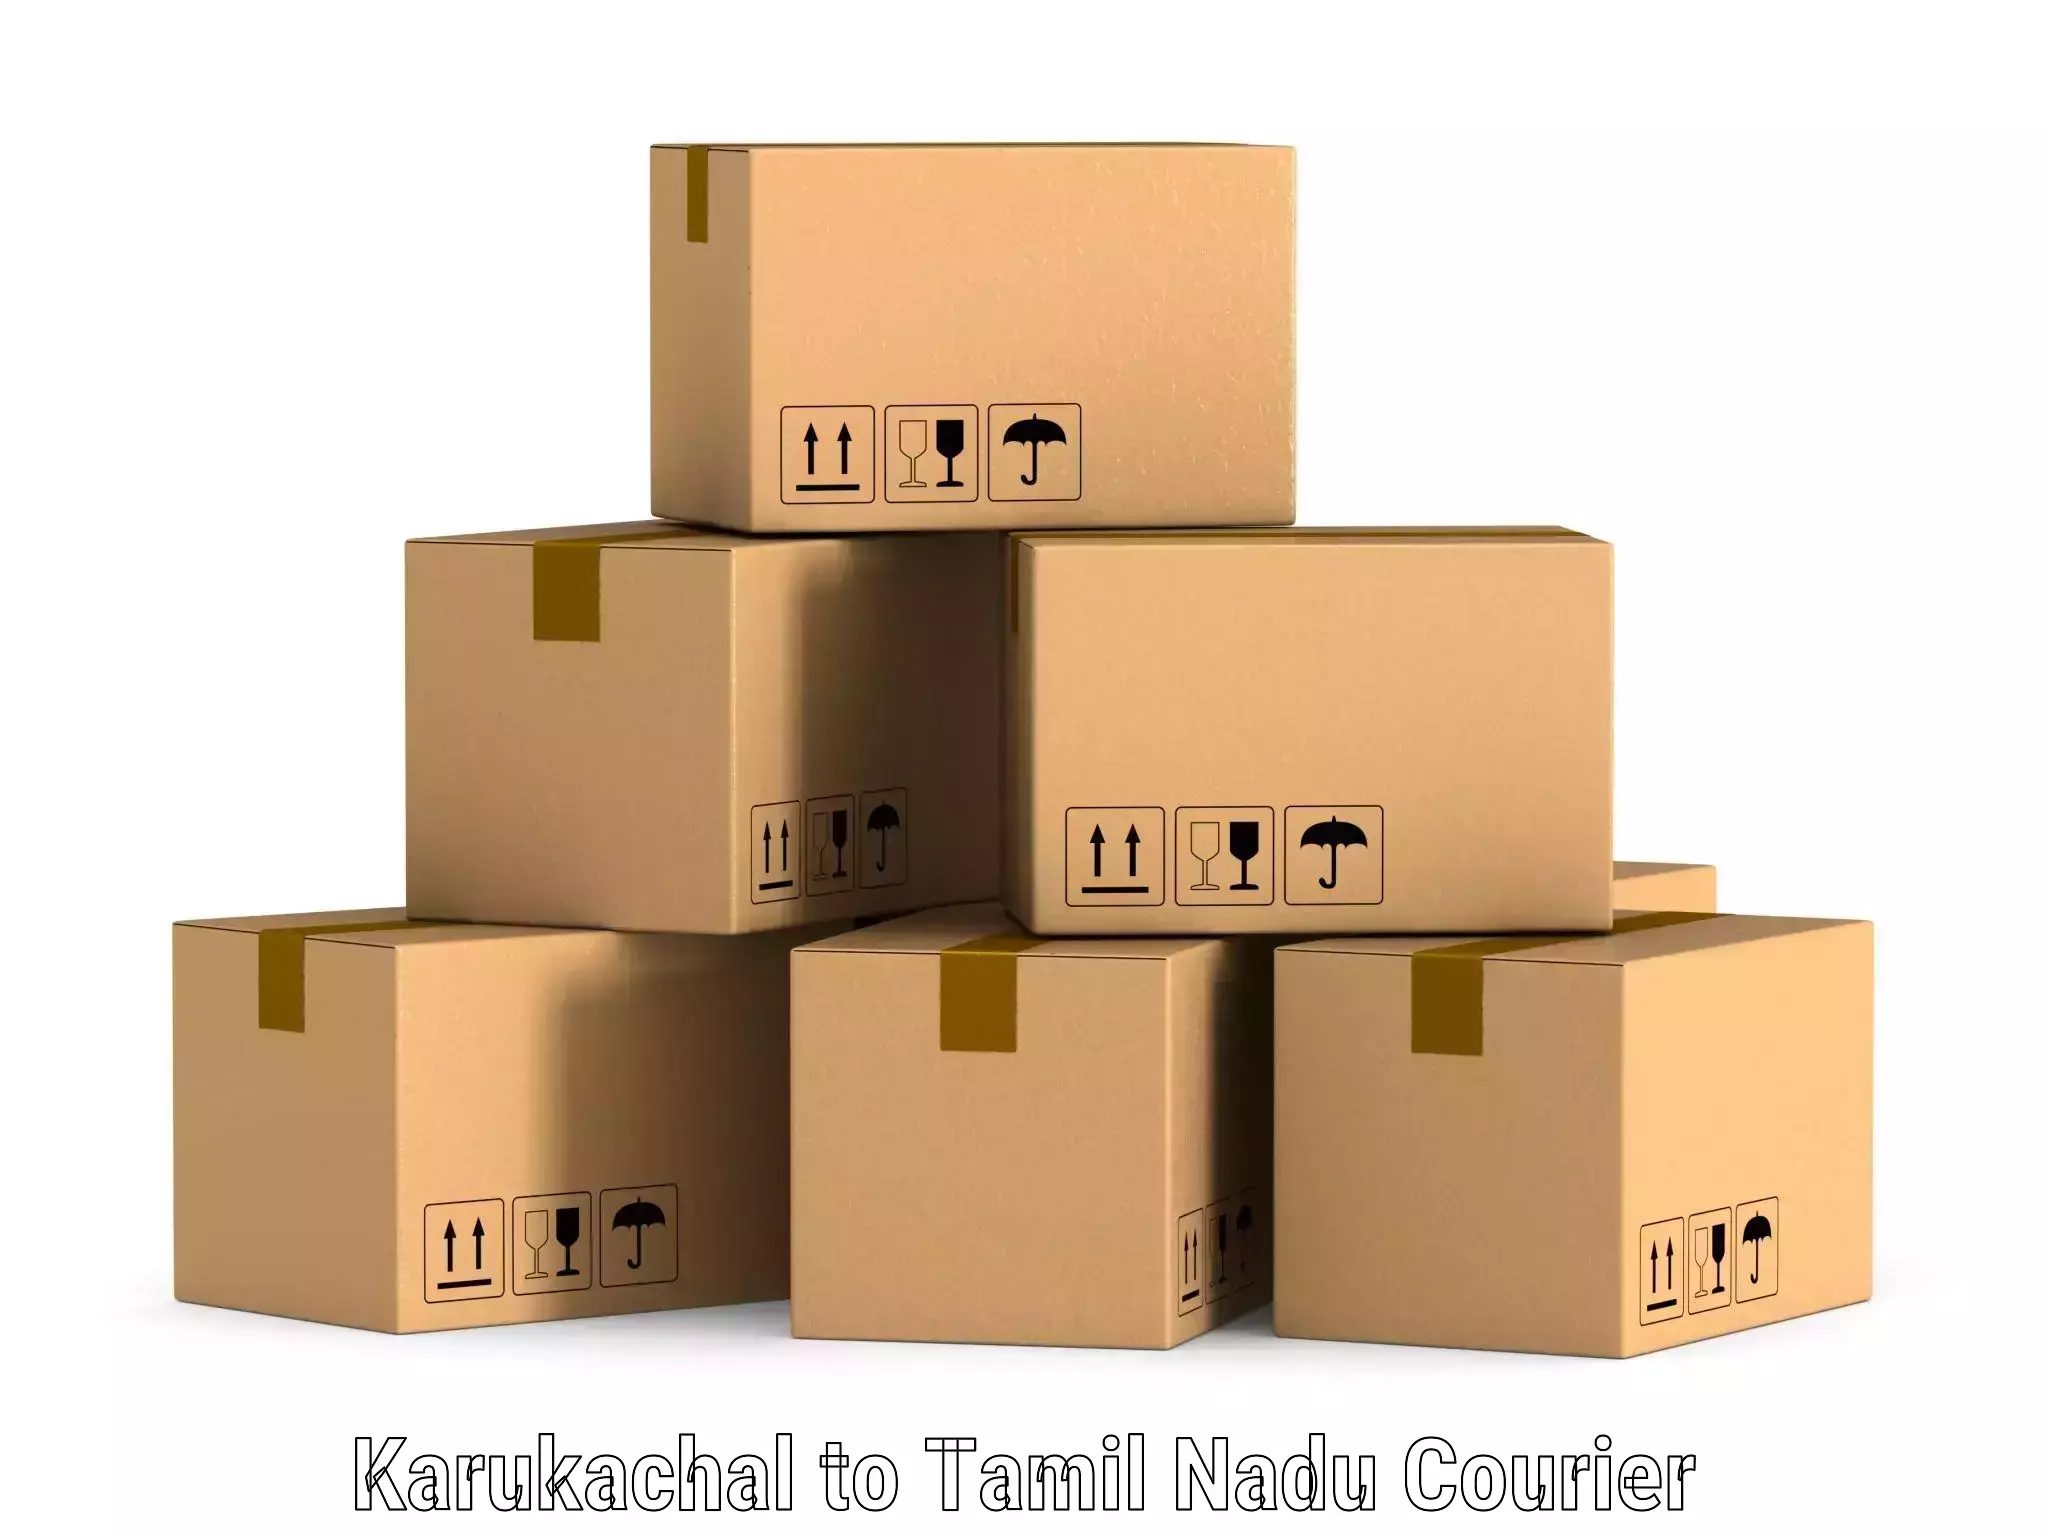 Global shipping networks in Karukachal to Avadi